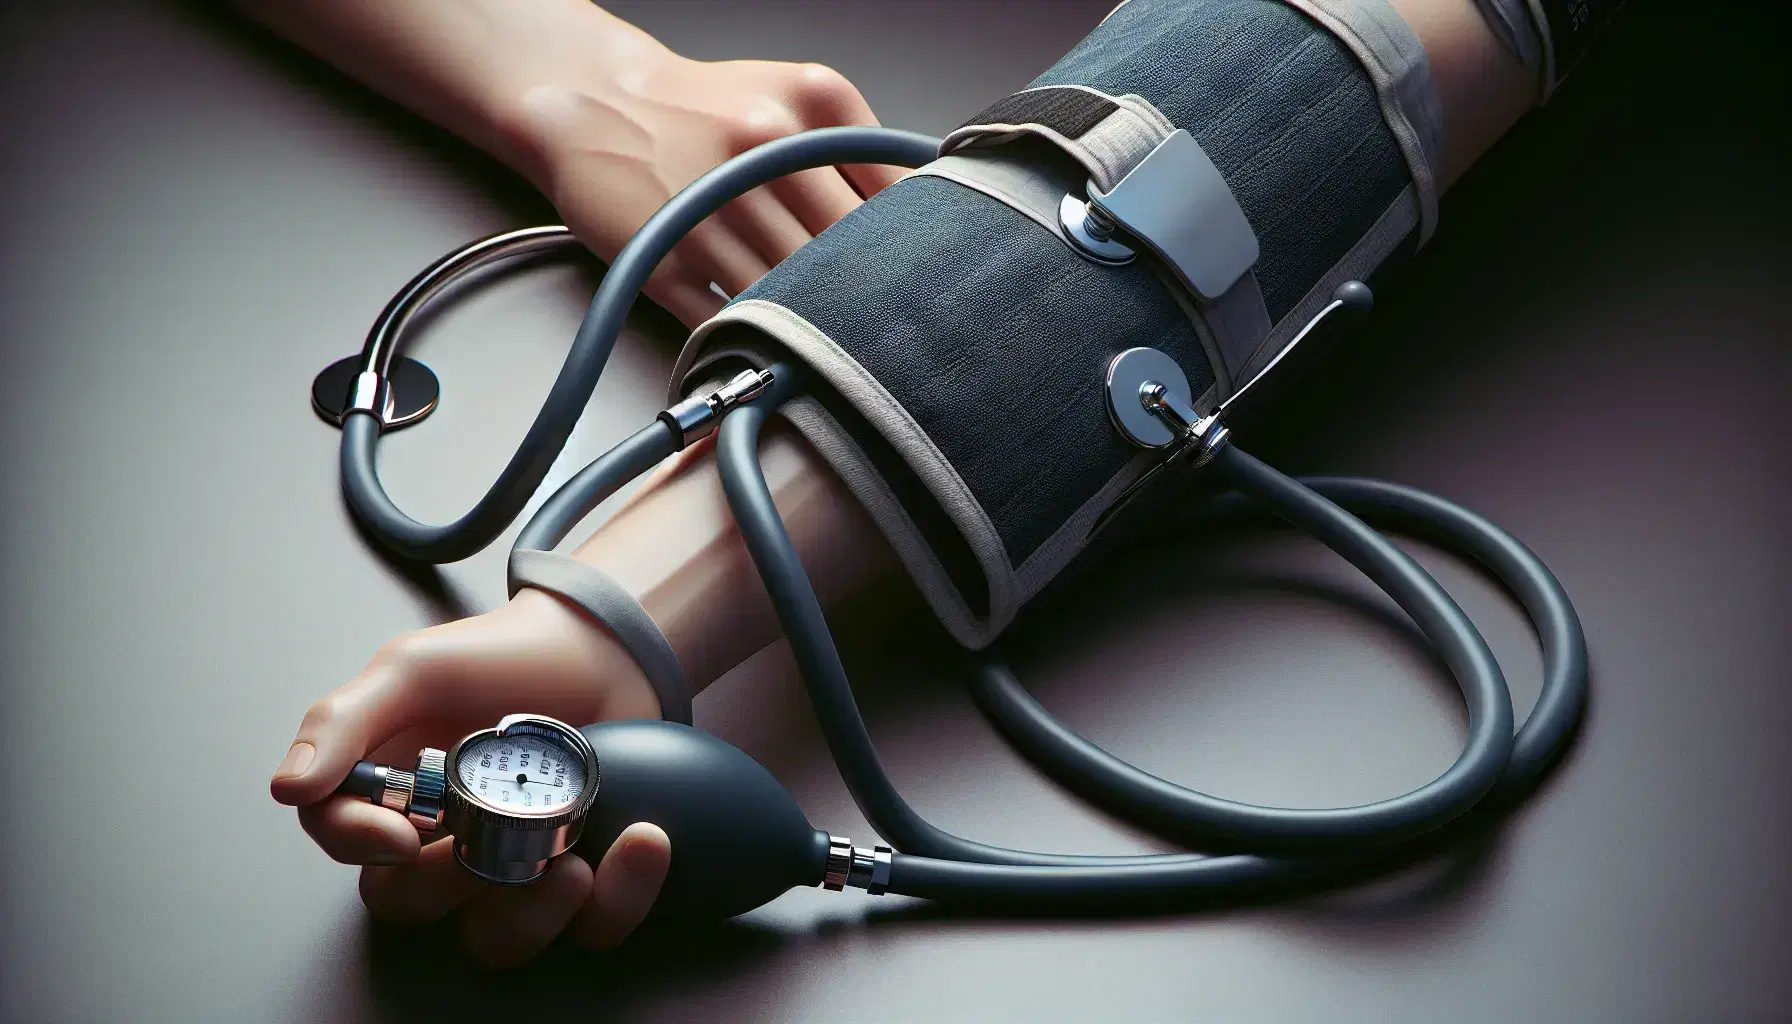 Blood pressure measurement with sphygmomanometer wrapped on arm and stethoscope placed on elbow, in blurred clinical environment.